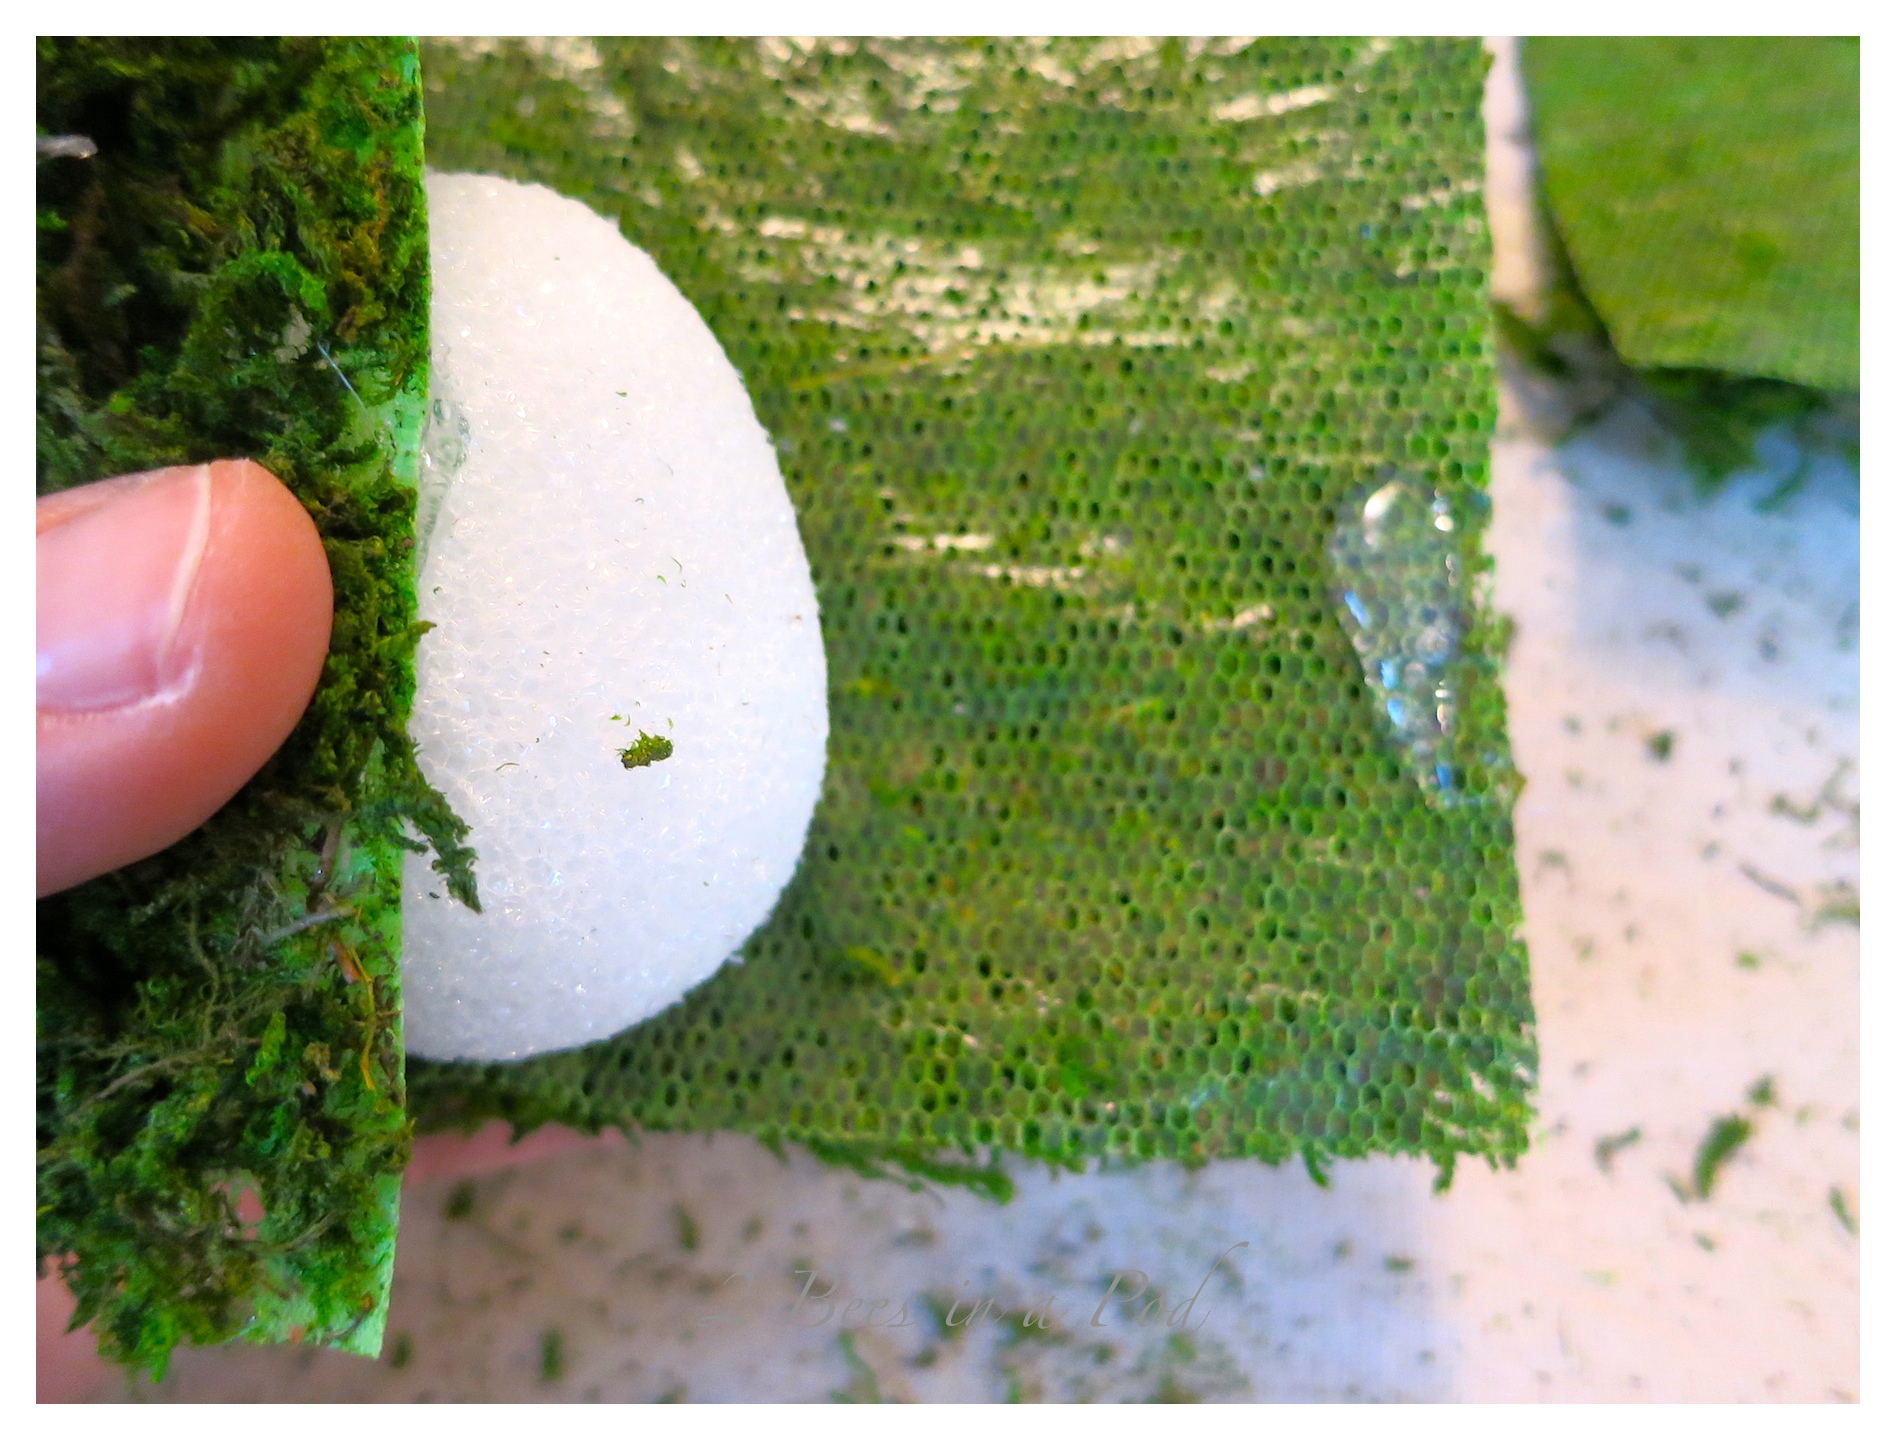 DIY moss covered eggs for Spring and Easter. Easy do-it-yourself project that takes just minutes - sheet moss, styrofoam eggs and a glue guns!